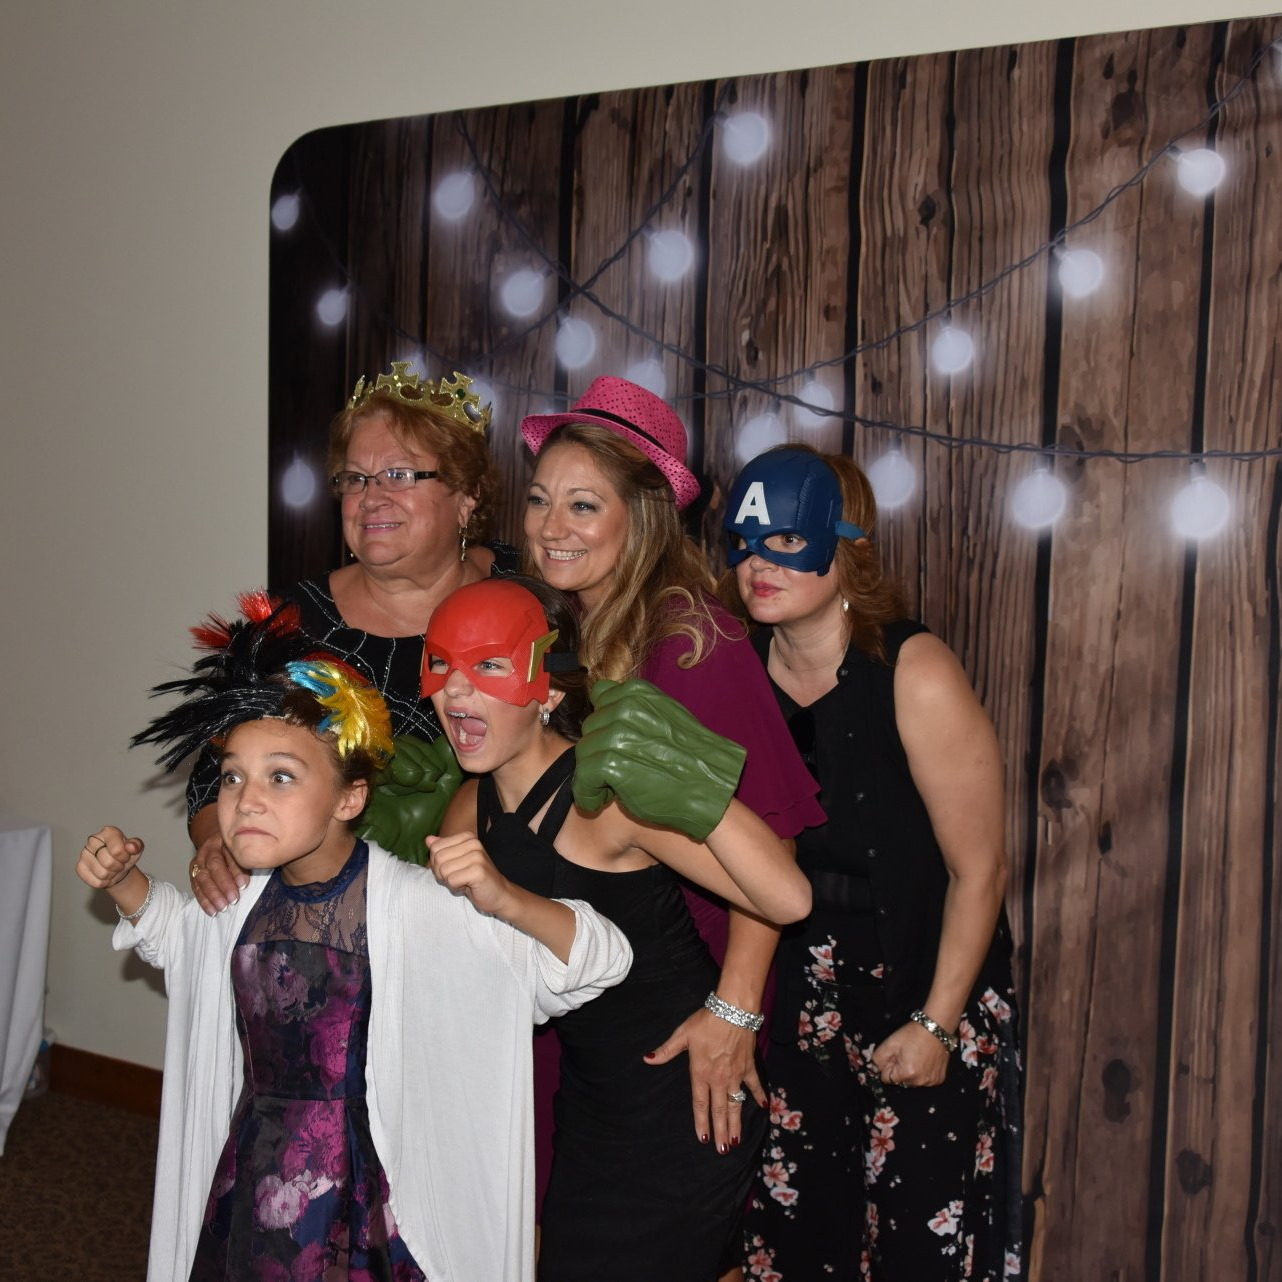 pillow backdrop photo booth rental in near me Massachusetts New Hampshire Maine